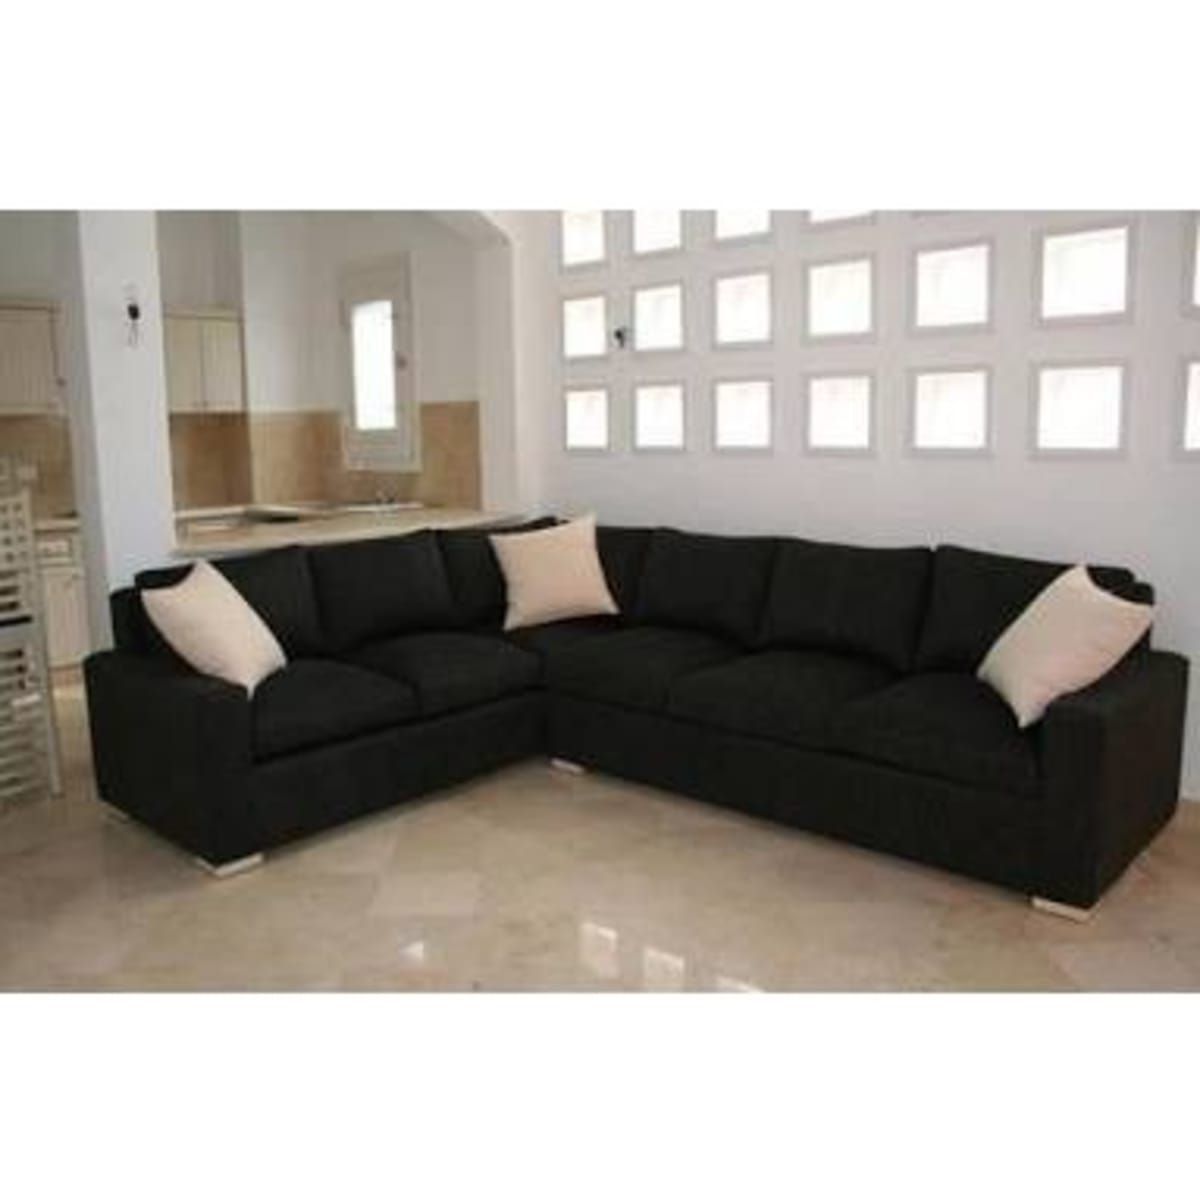 Black Fabric 6 Seater Sectional Sofa With 3 Free Throw Pillows | Konga  Online Shopping In 6 Seater Sectional Couches (Gallery 15 of 20)